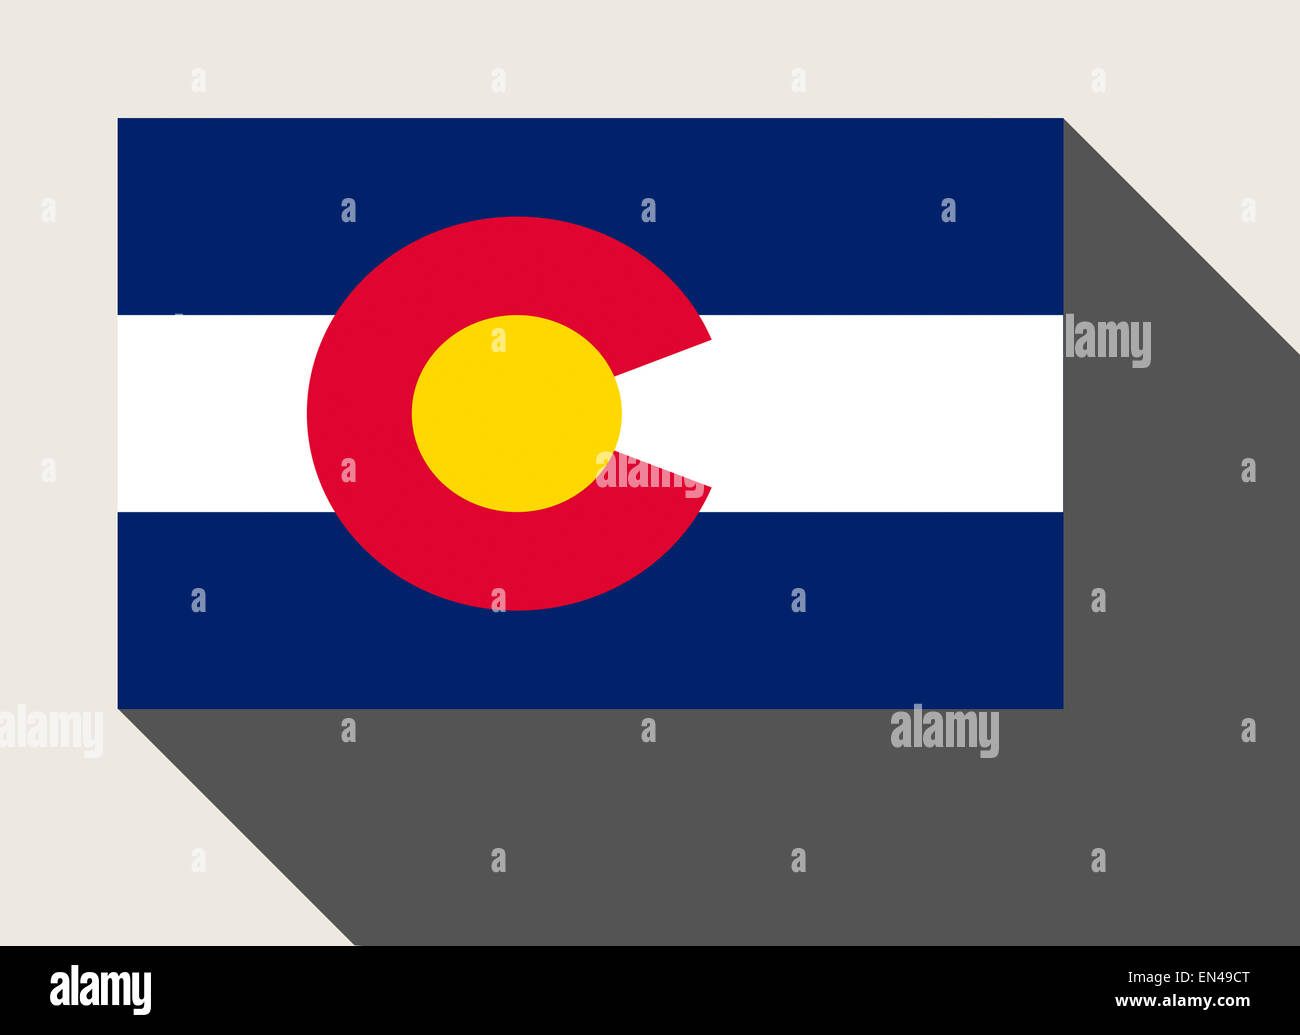 American State of Colorado flag in flat web design style. Stock Photo